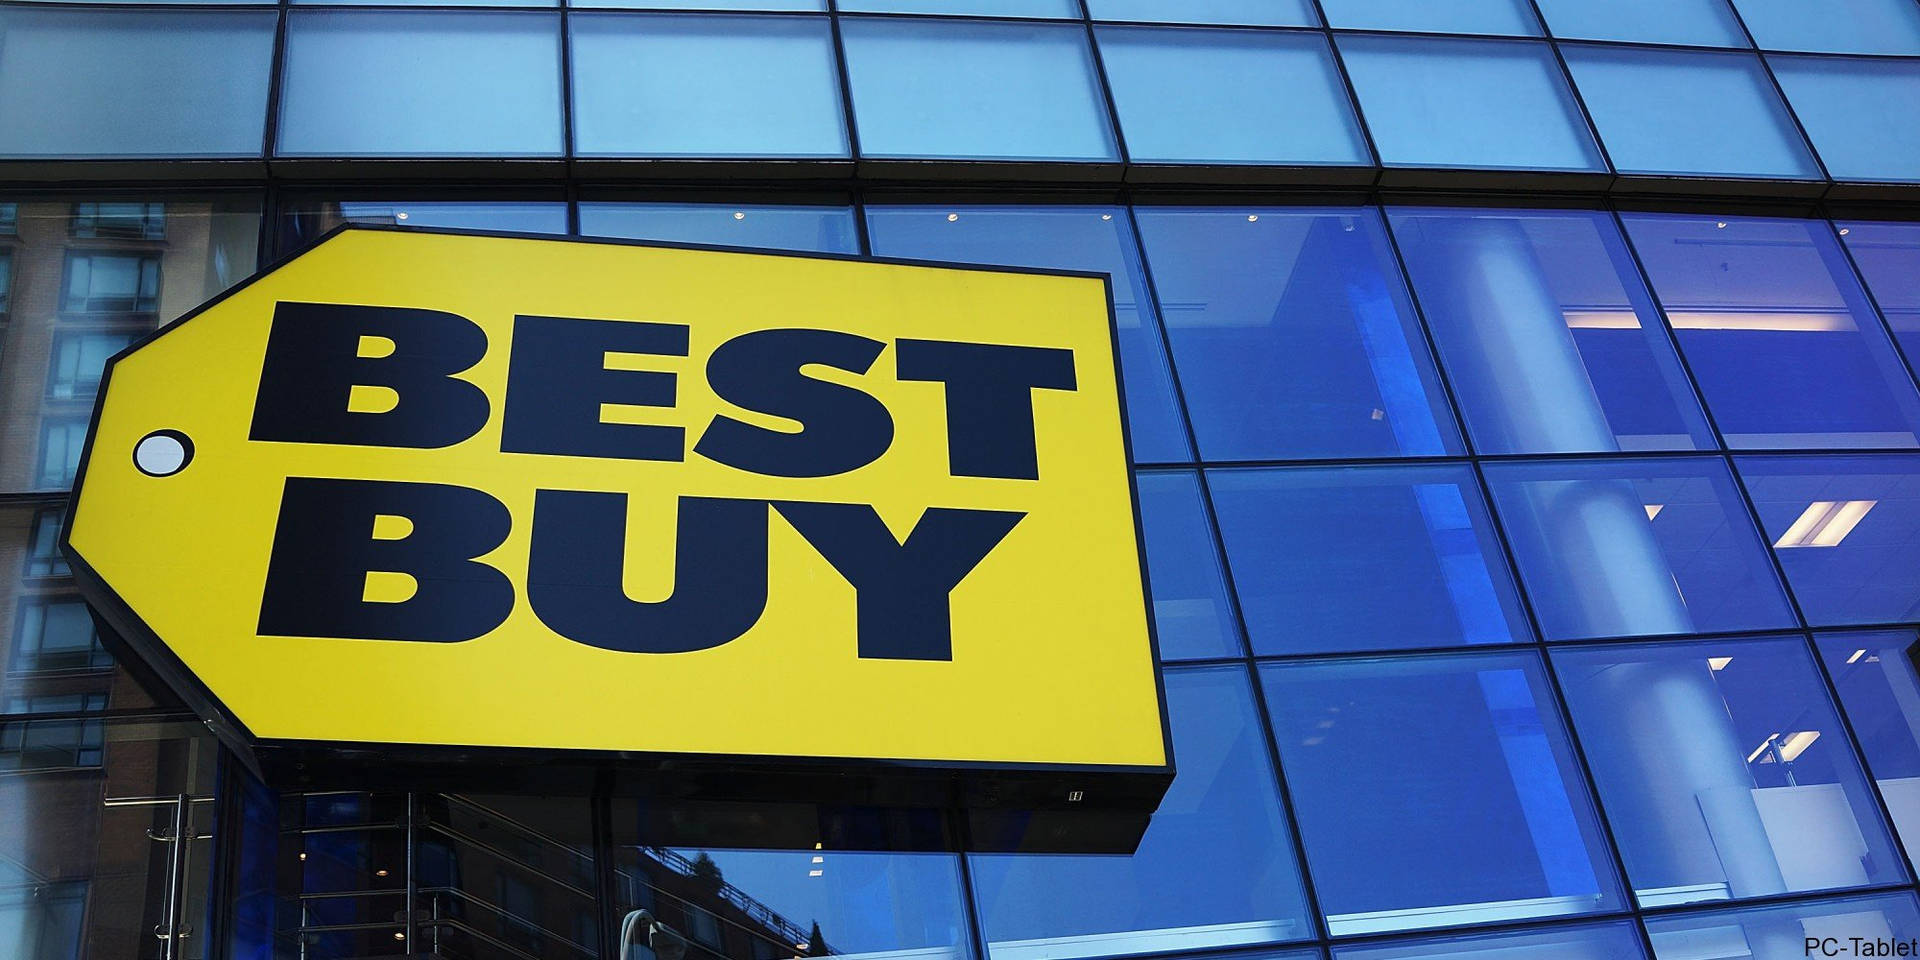 Best Buy Signage On Glass Wallpaper